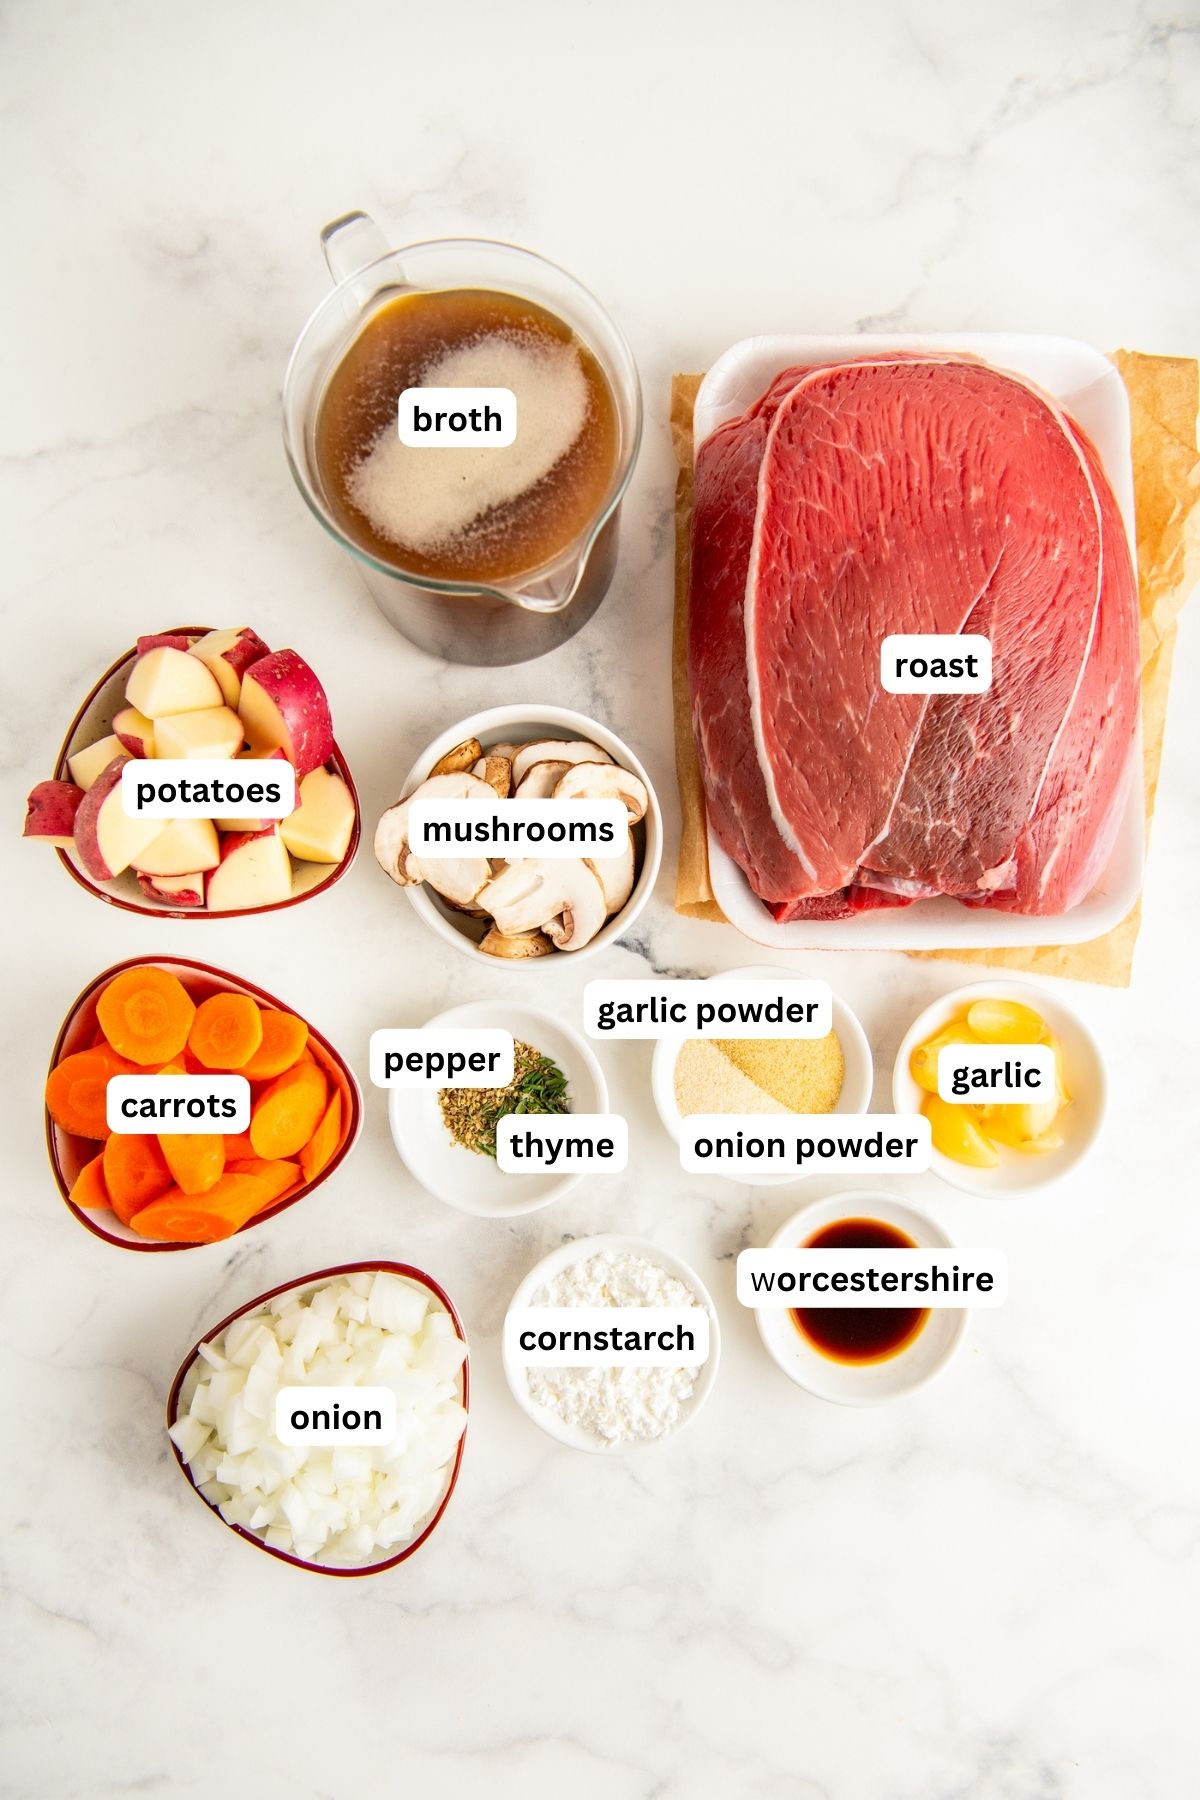 Ingredients for crockpot pot roast recipe arranged in bowls on a marble countertop, from top to bottom: broth, roast, potatoes, mushrooms, carrots, pepper, thyme, garlic powder, onion powder, garlic, onion, cornstarch and Worcestershire sauce.